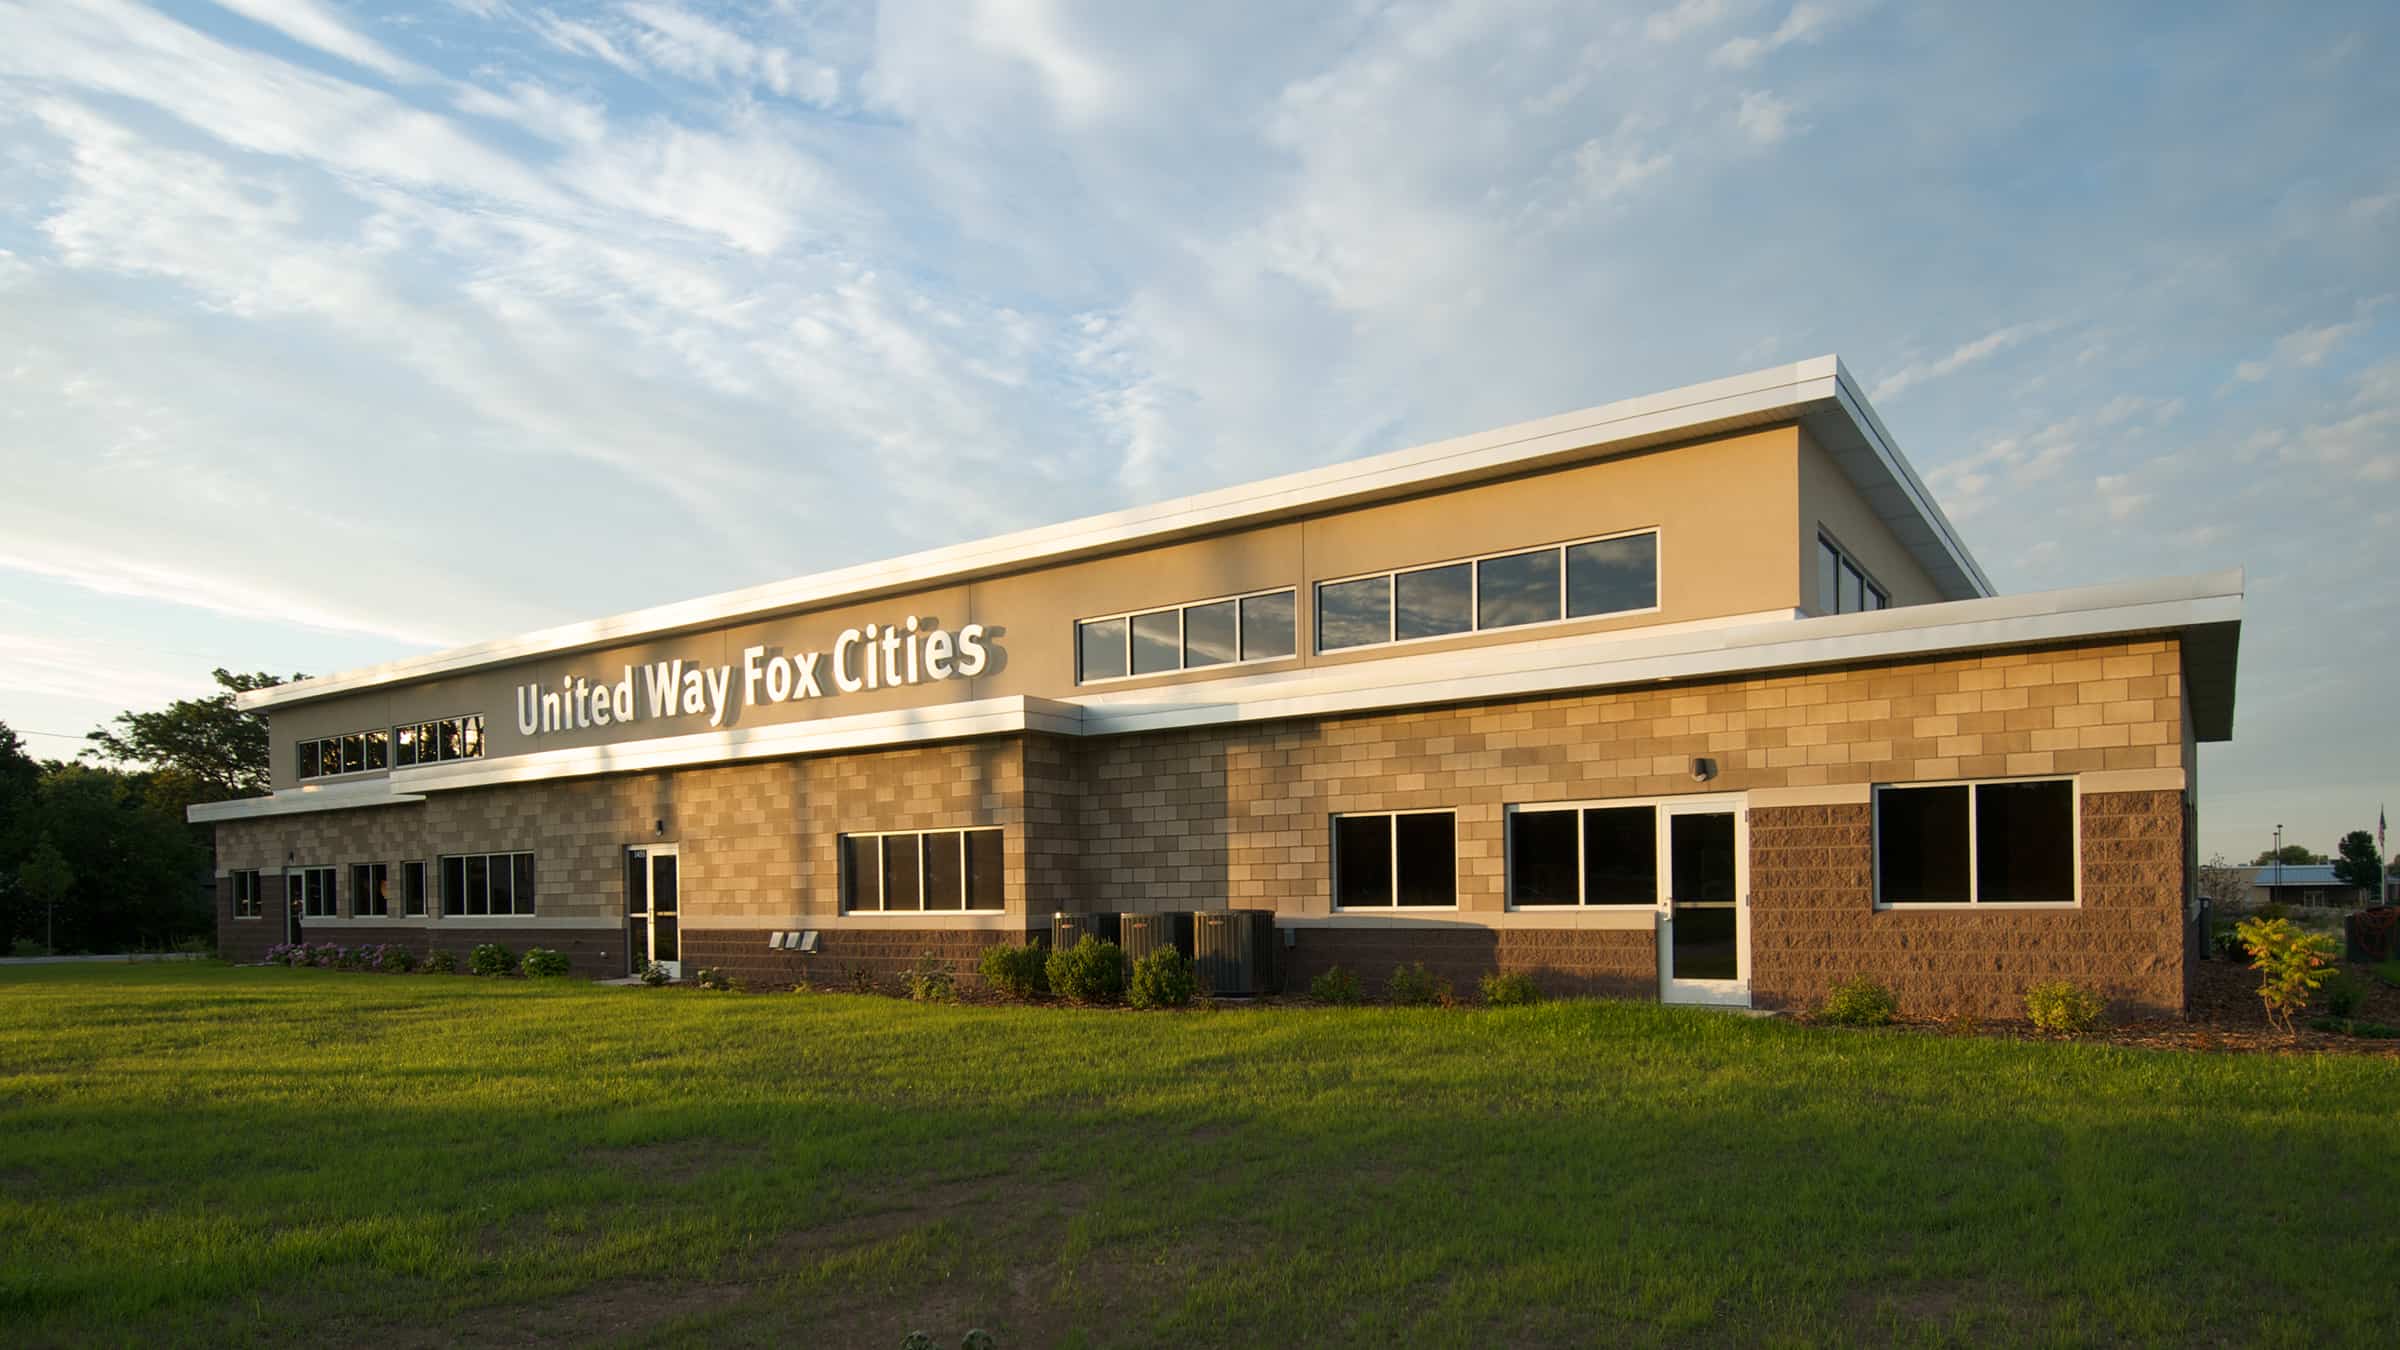 United Way Fox Cities - Exterior View from Street